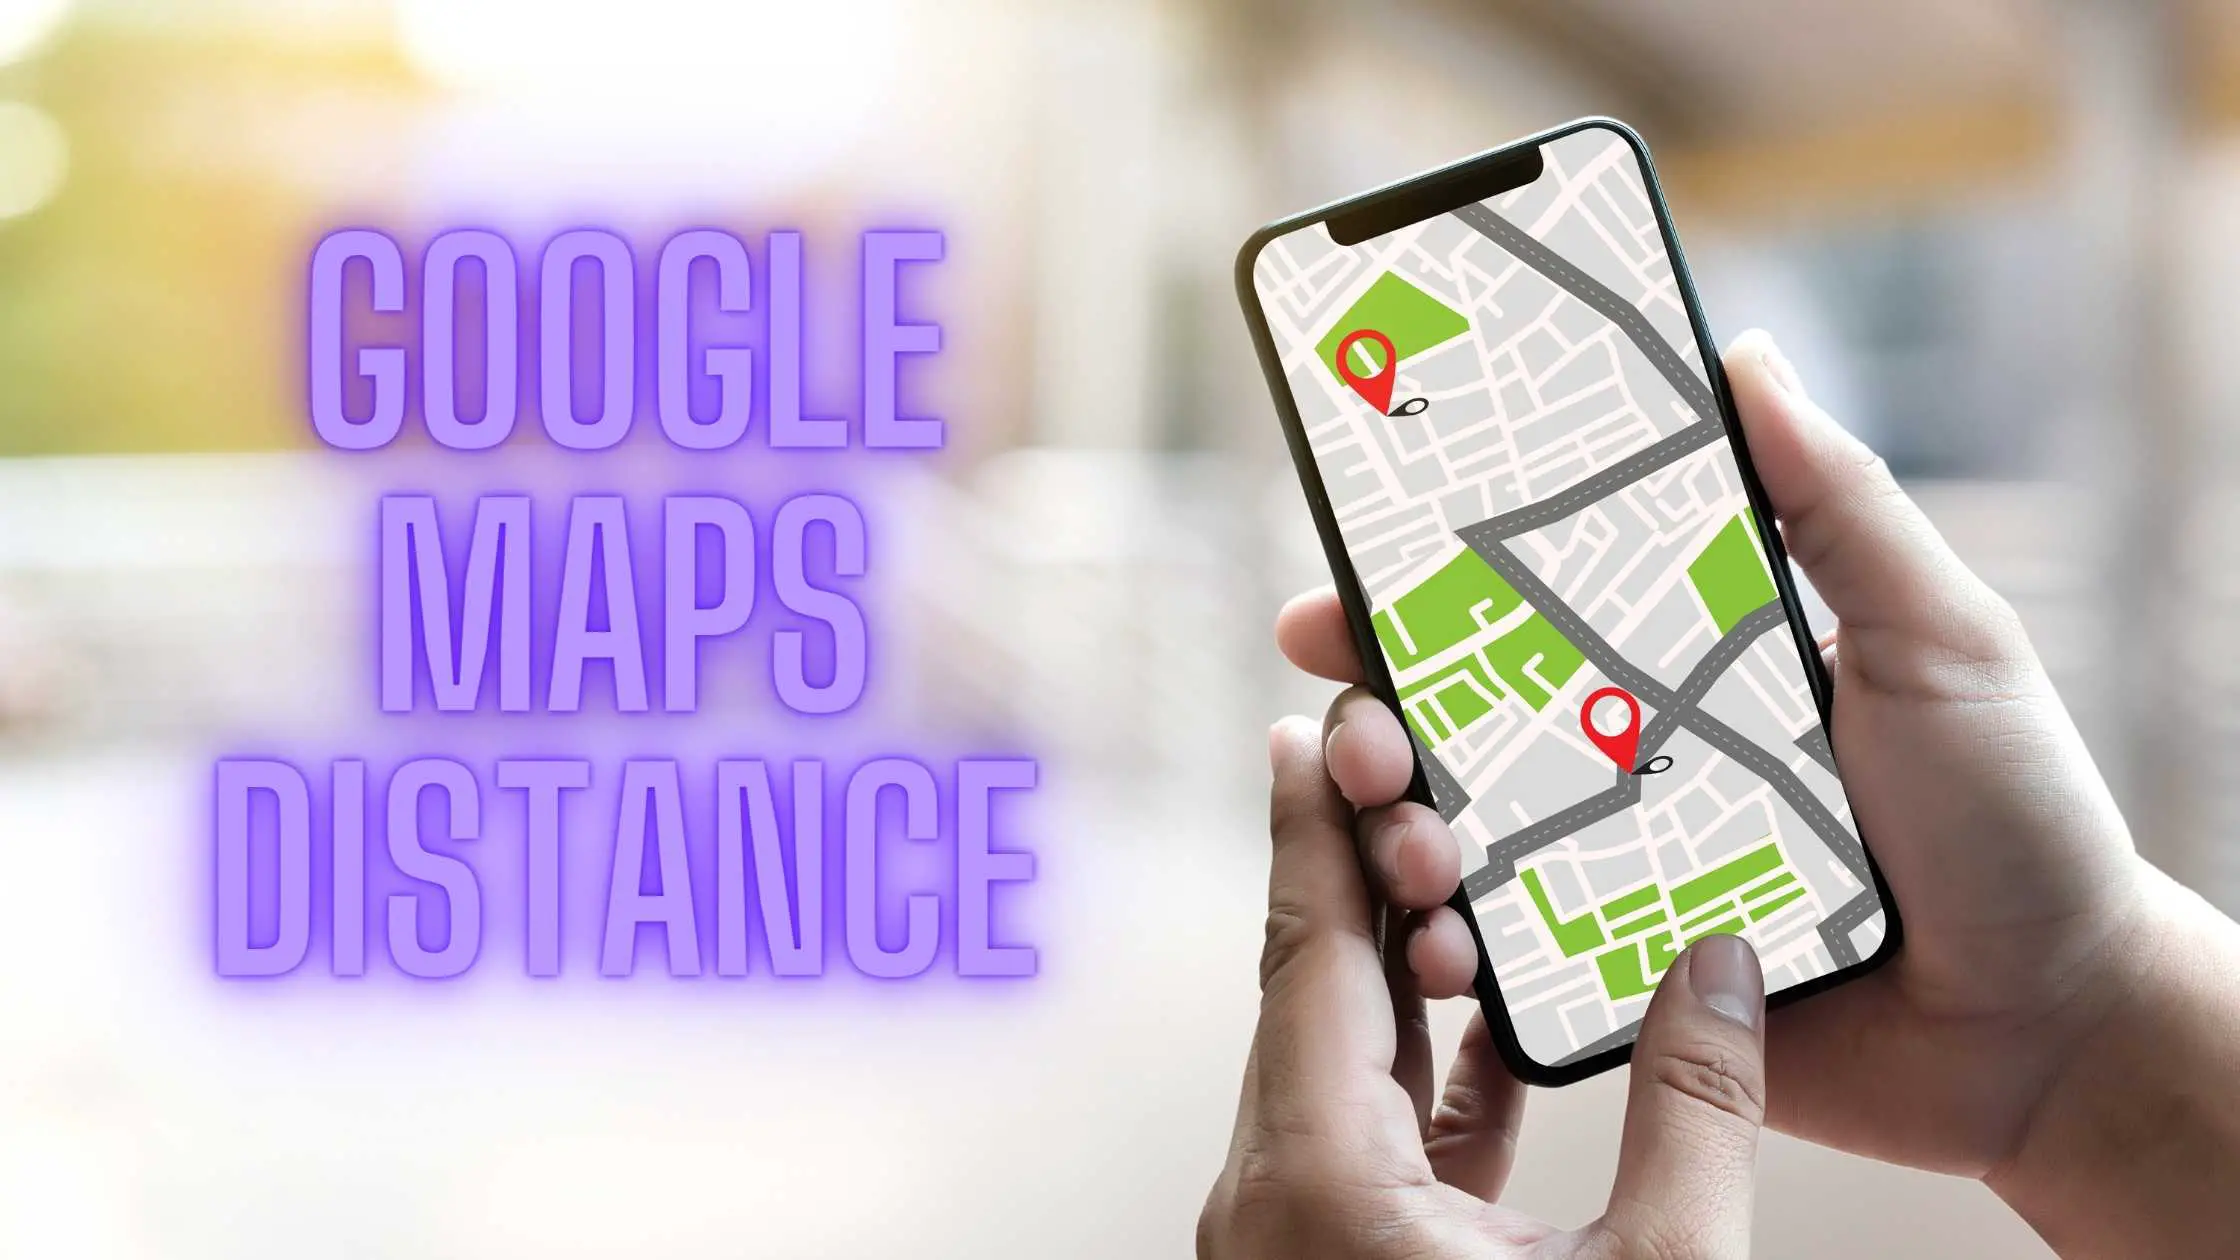 How To Check In Google Maps Distance Between Points